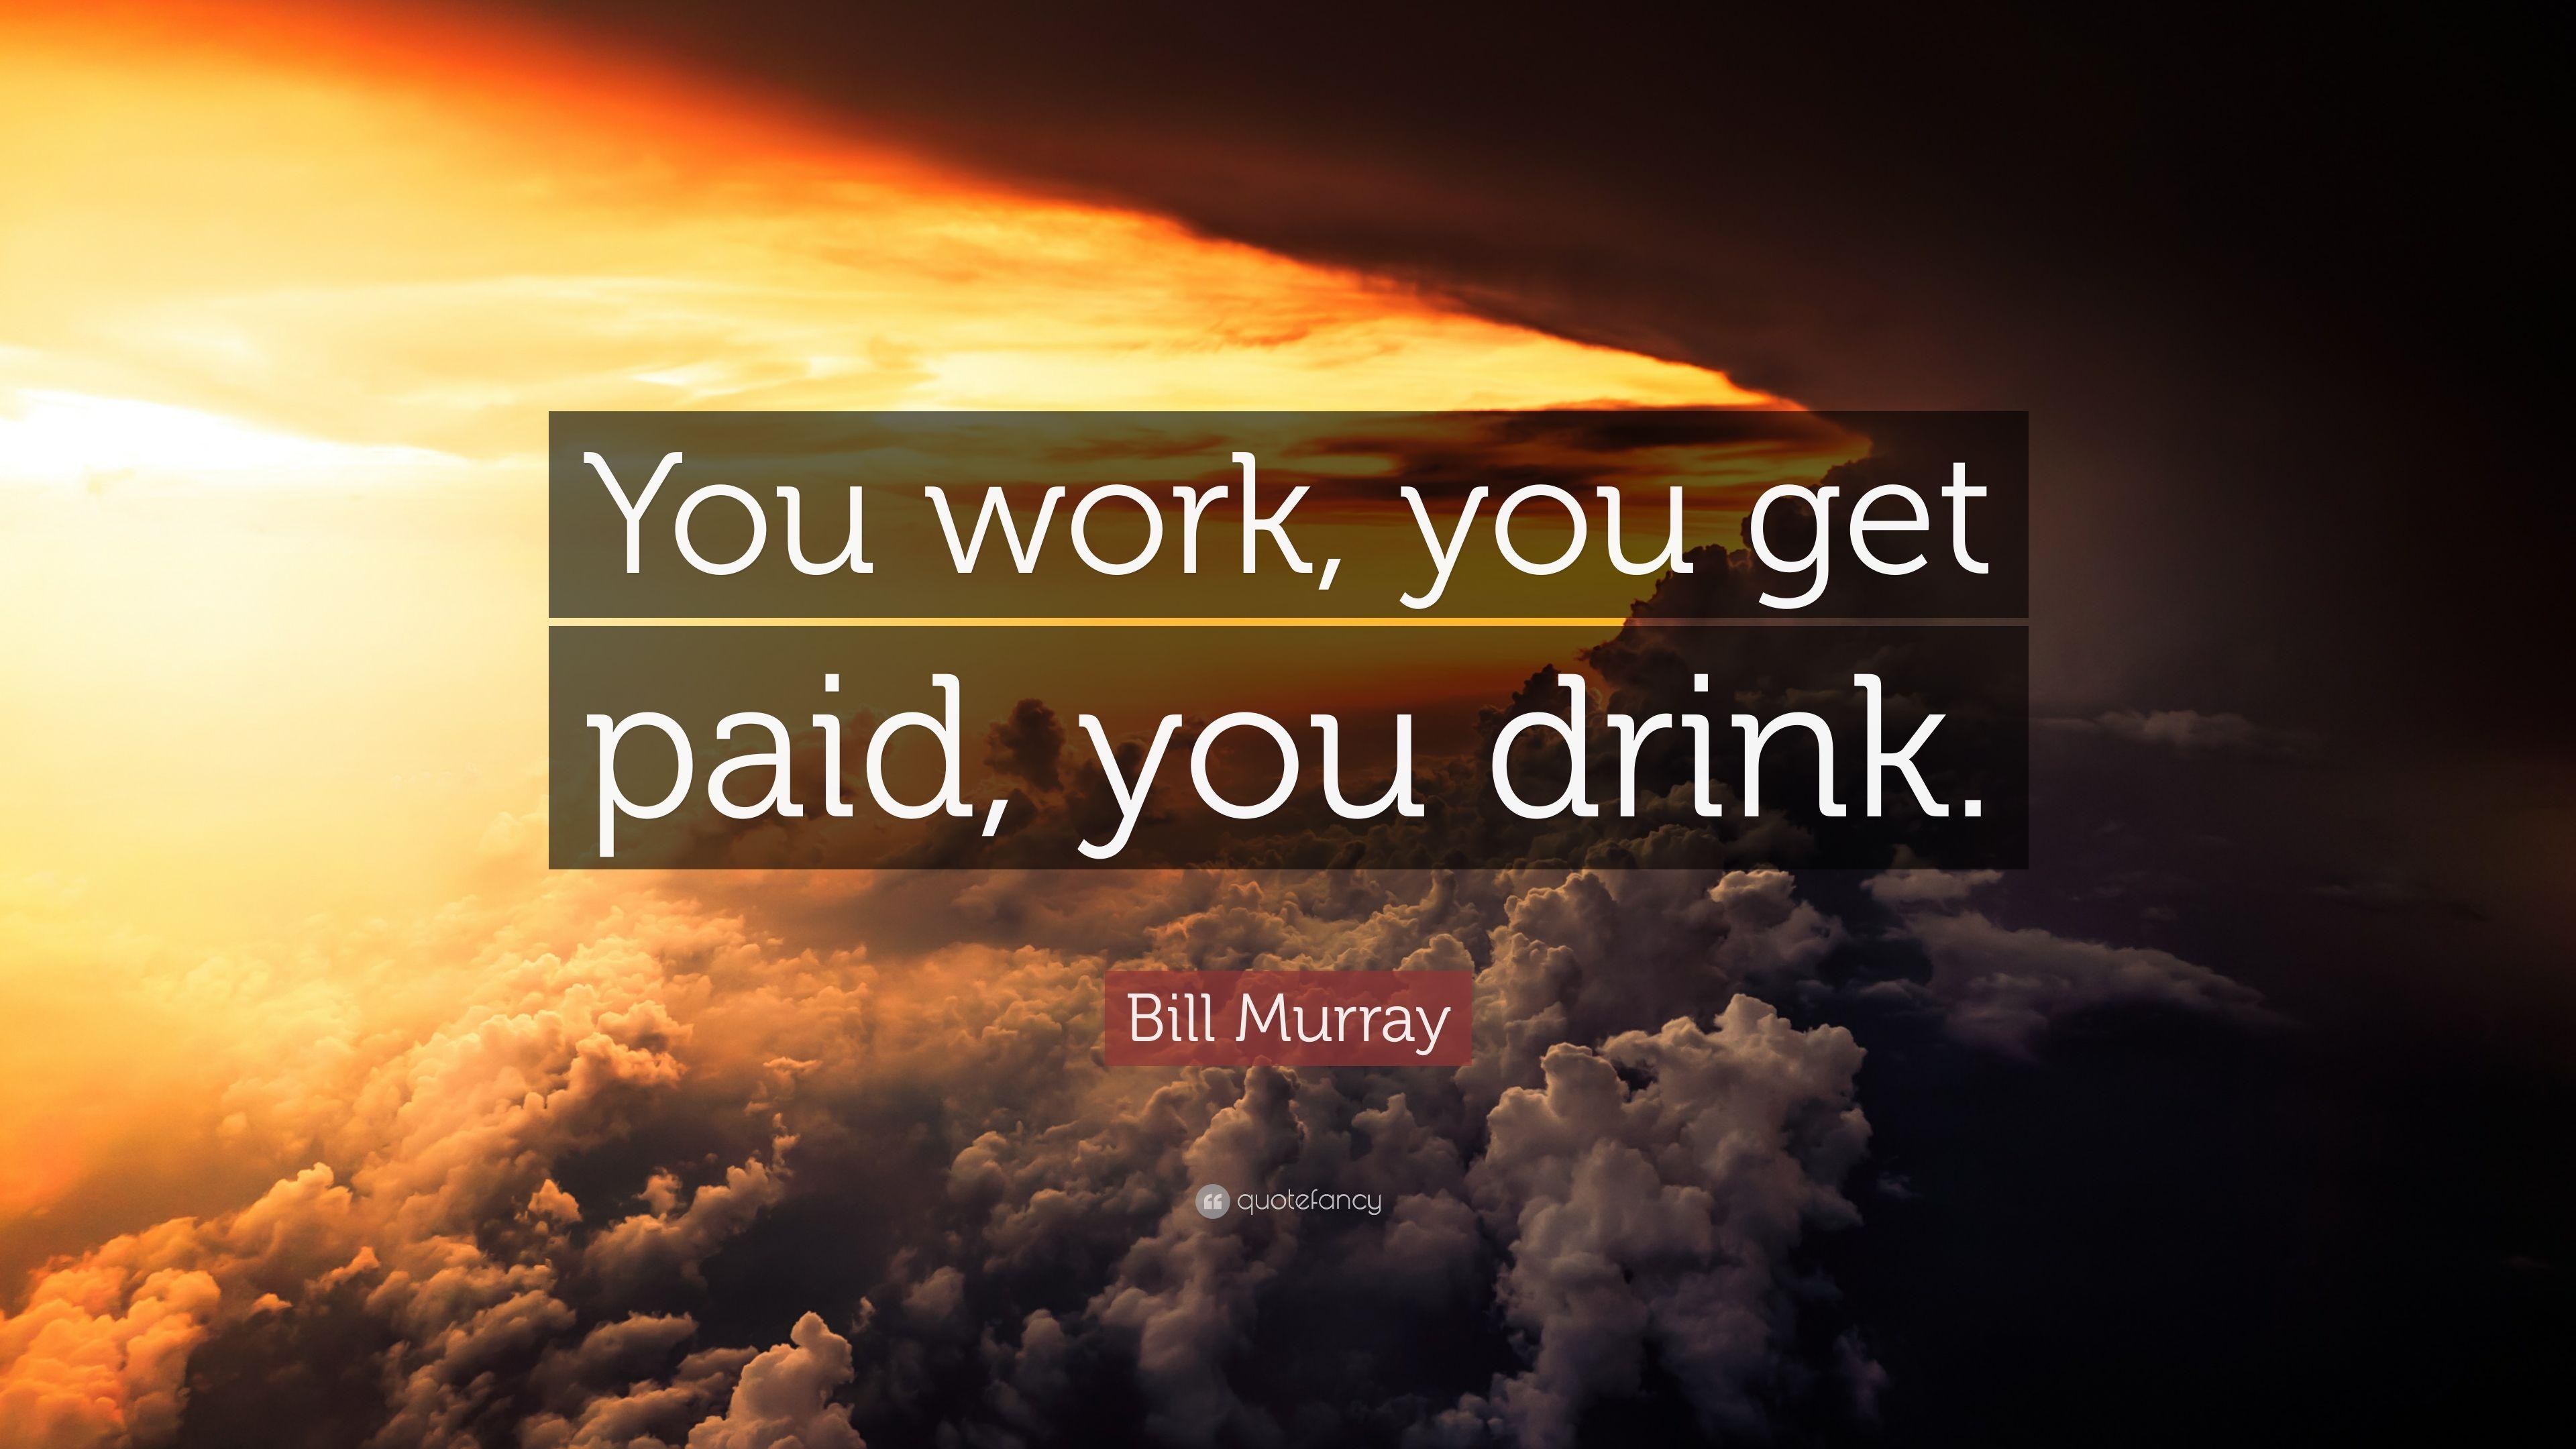 Bill Murray Quote: “You work, you get paid, you drink.” 7